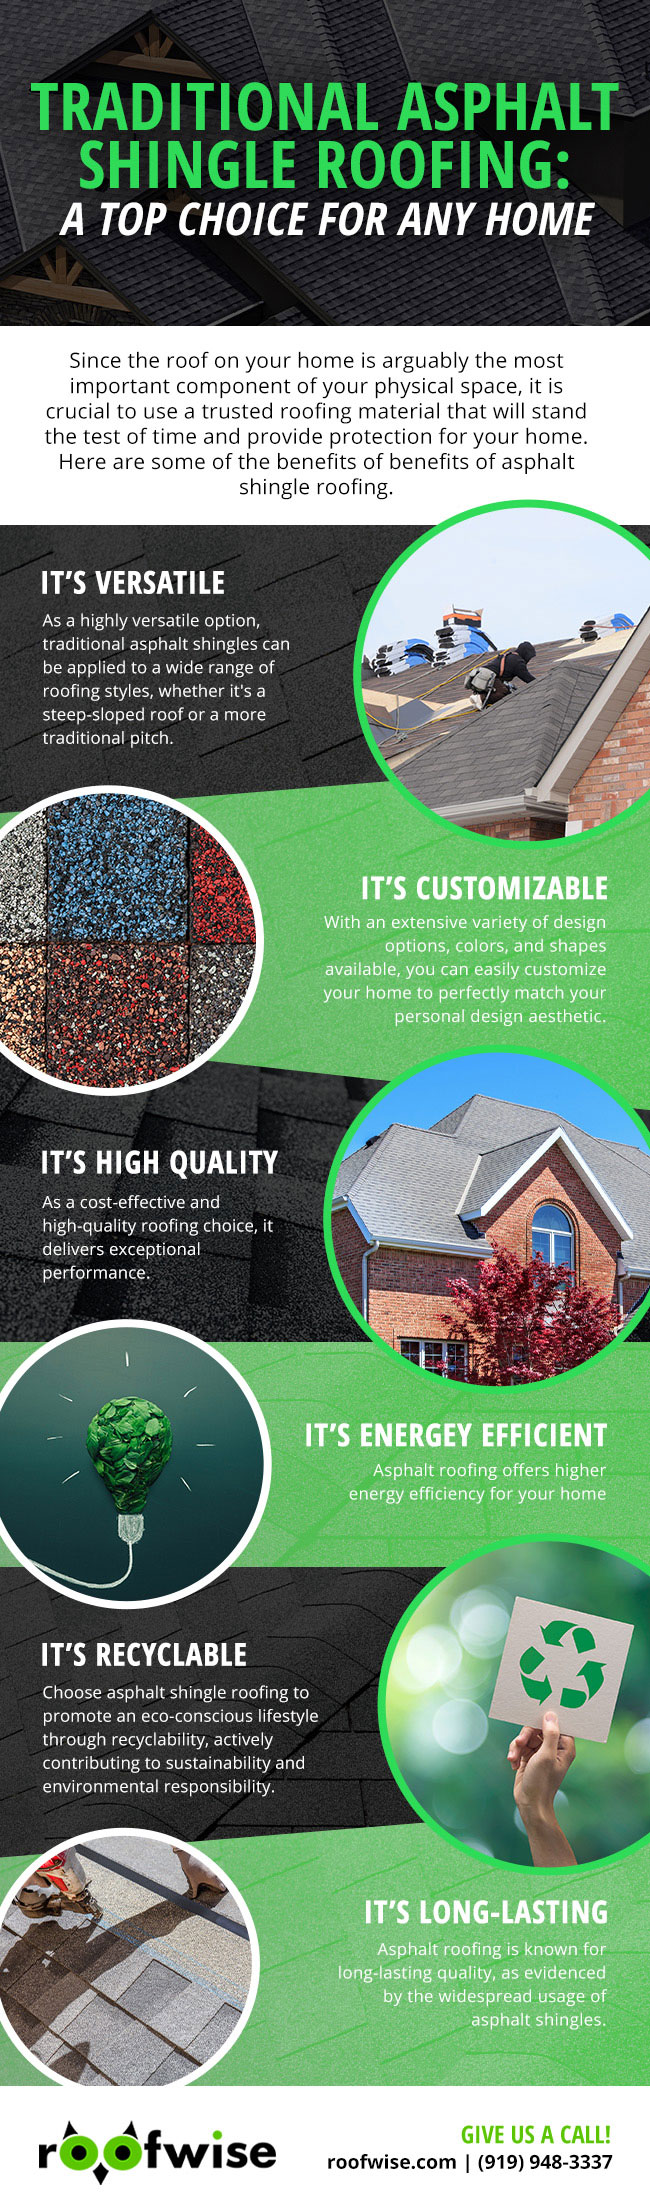 Traditional Asphalt Shingle Roofing is an Excellent Option for Any Home